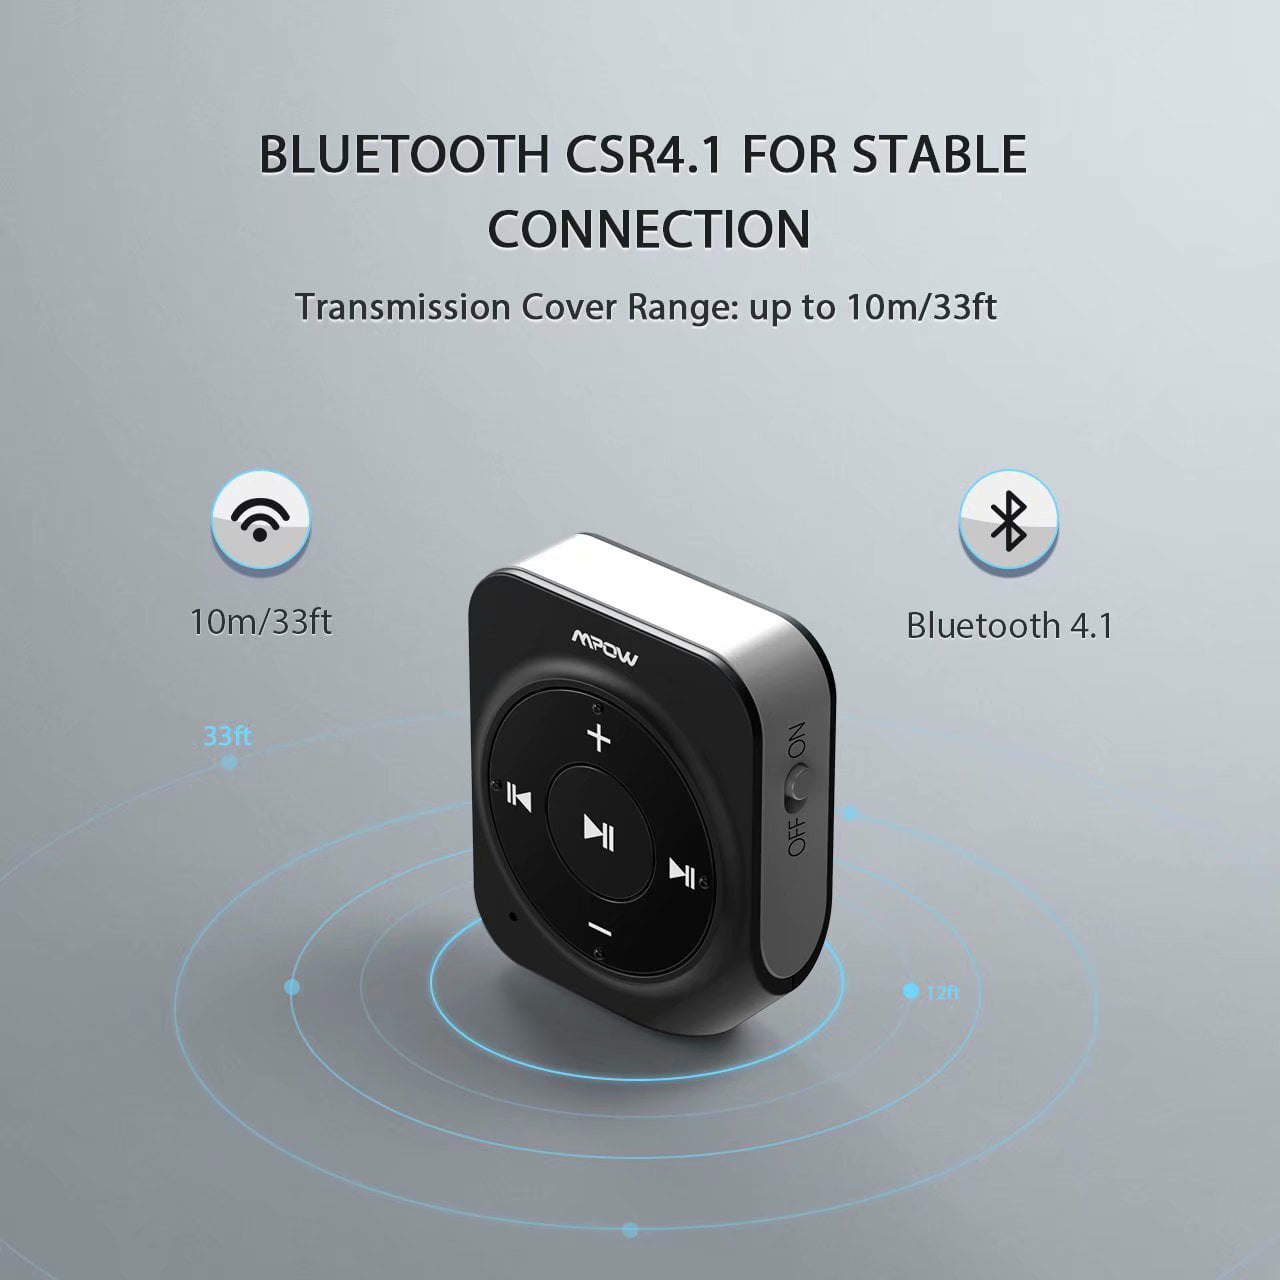 Mpow Bluetooth 4.1 Receiver Portable Wireless Audio Adapter with 15 Hours of Service